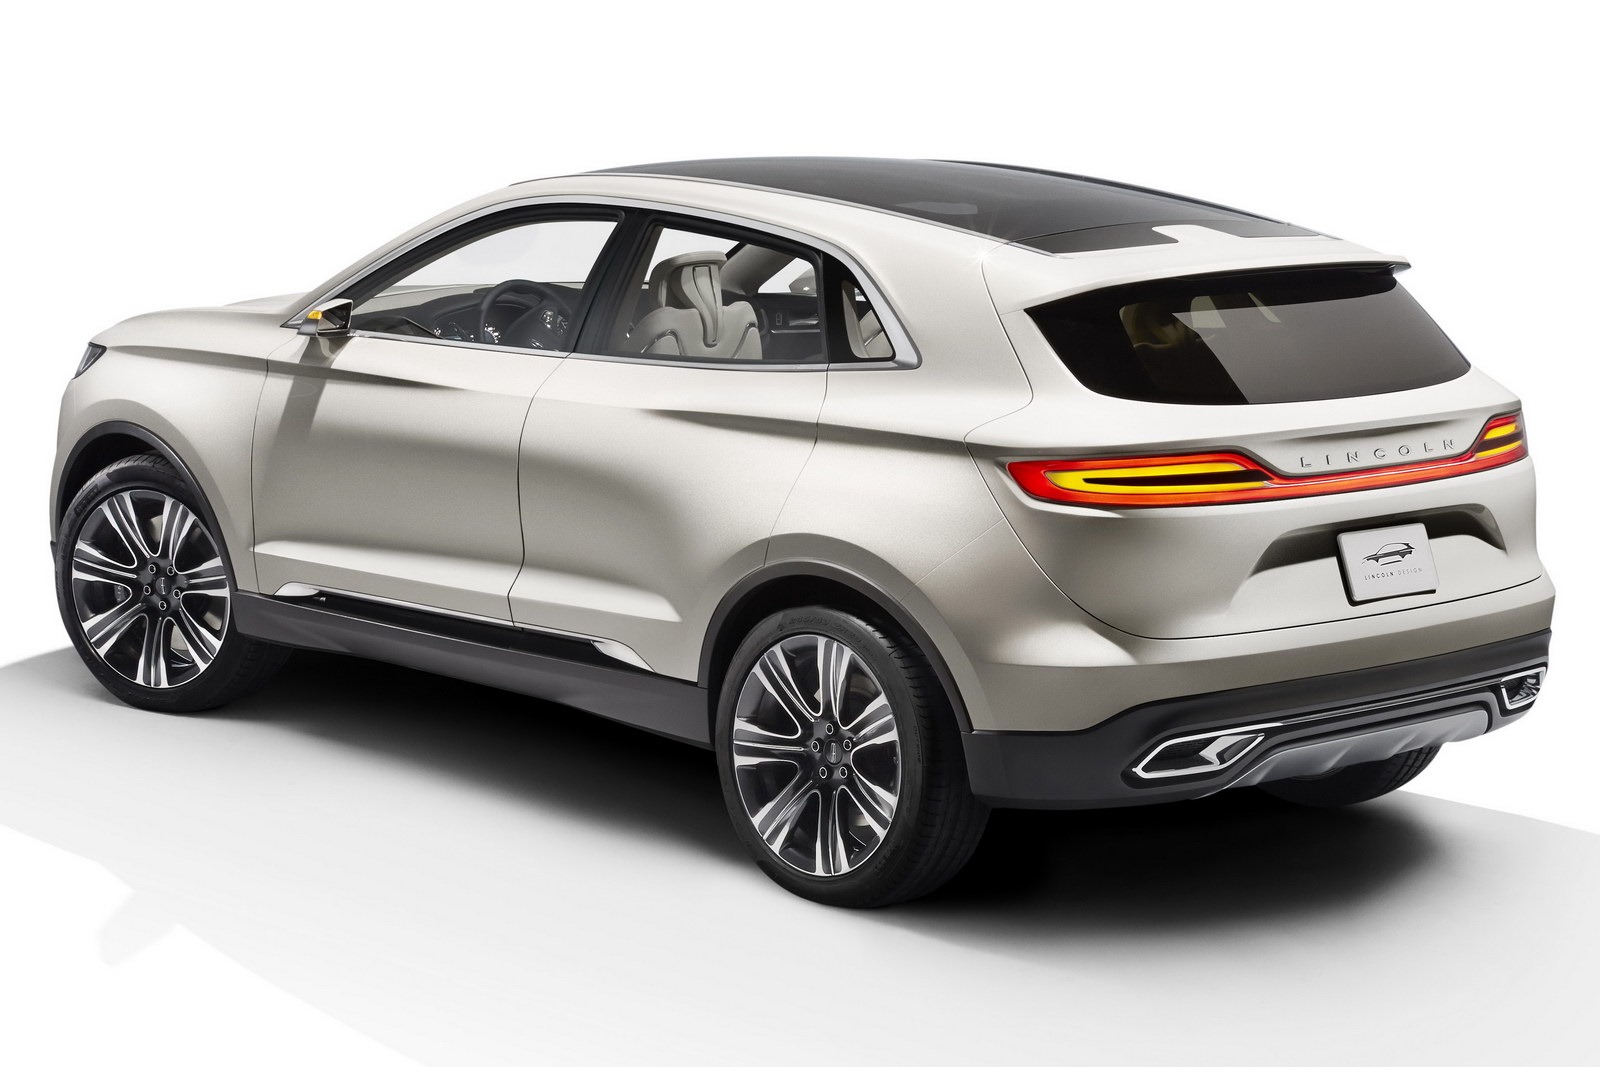 Images of 2014 Lincoln Mkc Concept | 1600x1067